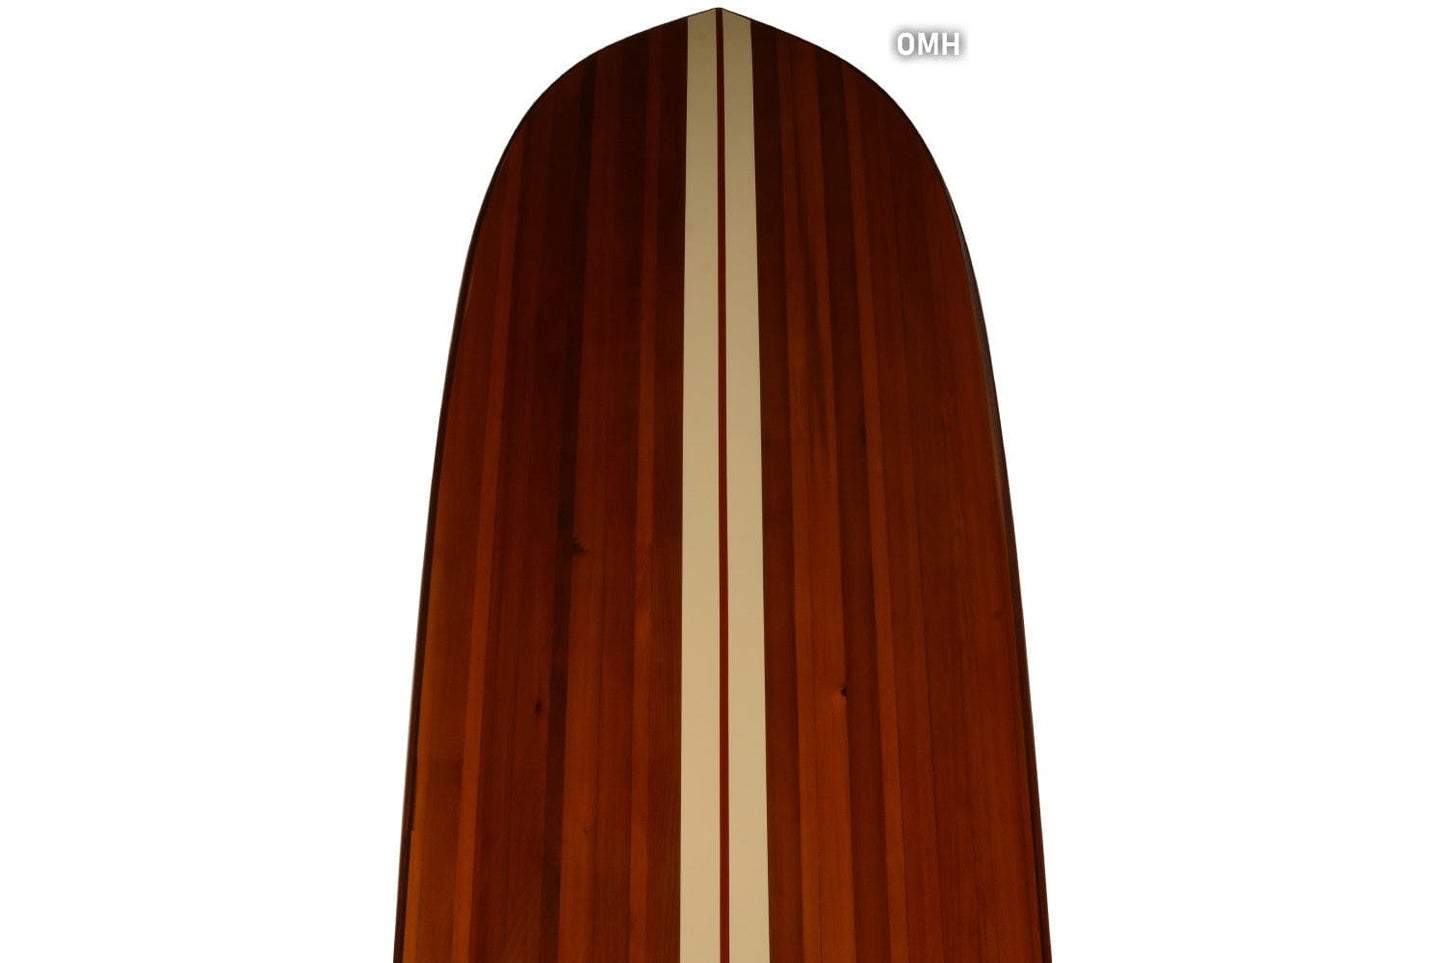 ALDO Creative Arts Collectibles Scale Model Real Fully Functional Paddle Board in Classic Red Cedarwood 11ft with 1 fin